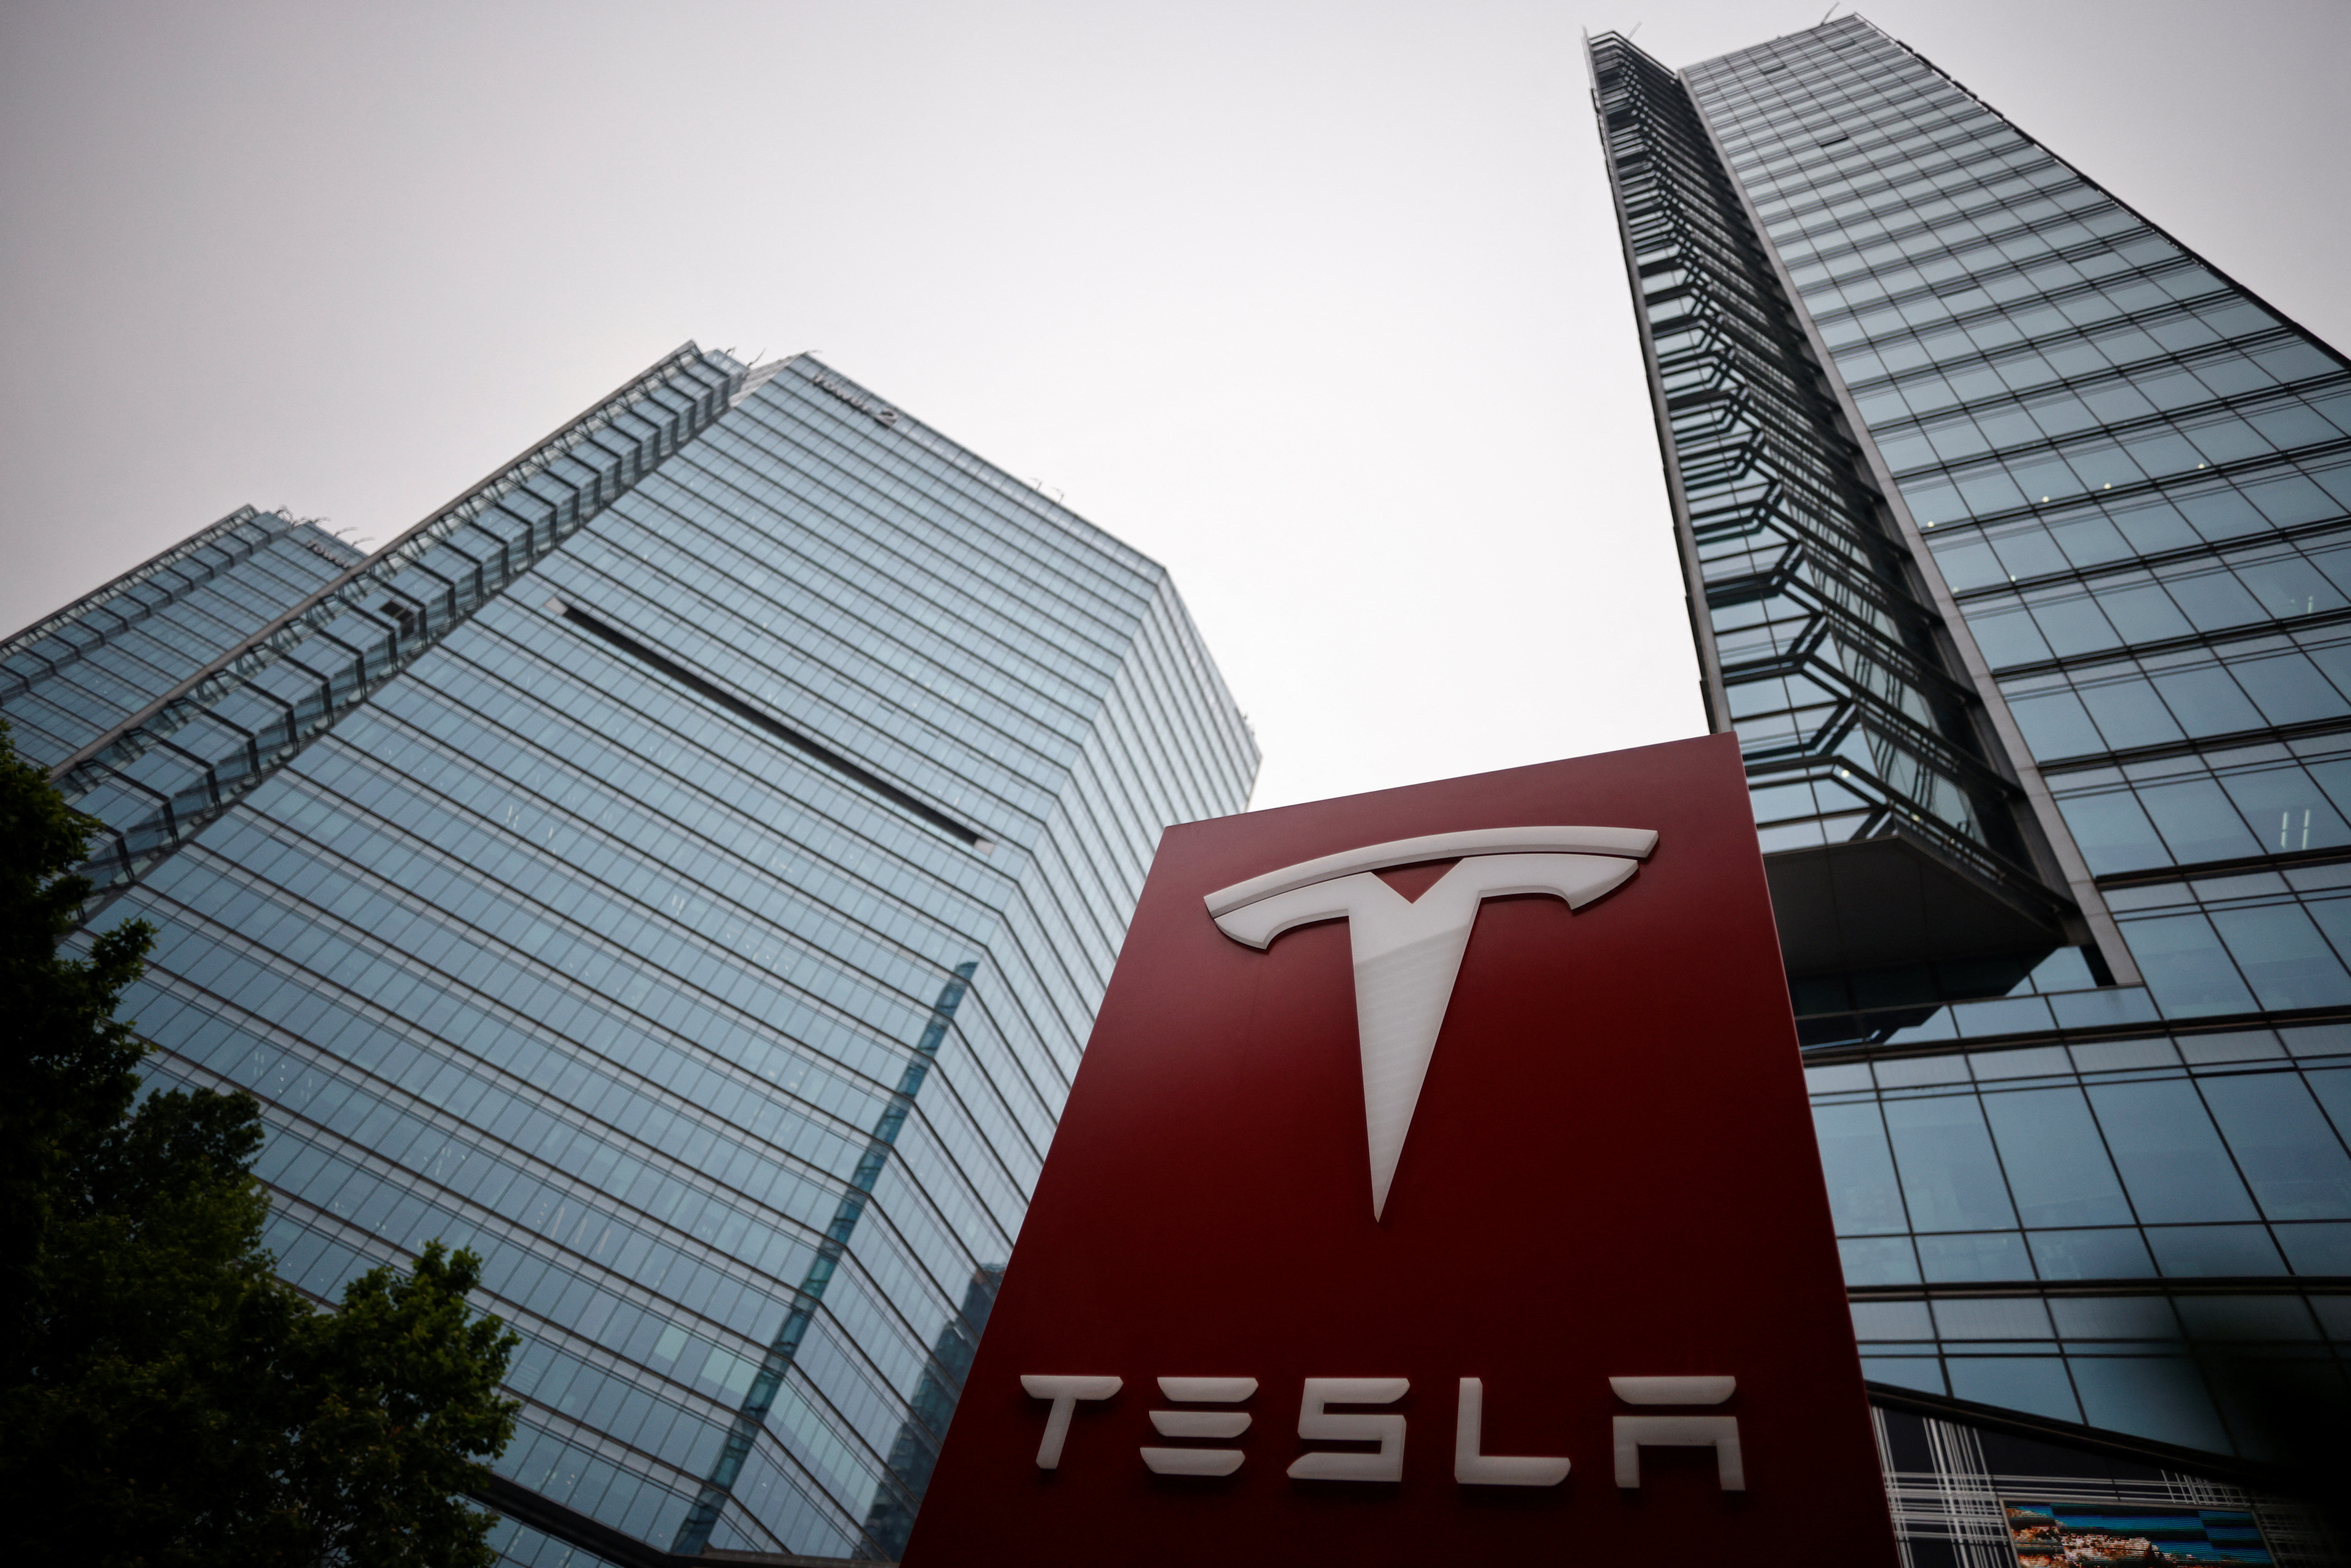 Tesla to roll out revamped Model Y from Shanghai plant - Bloomberg